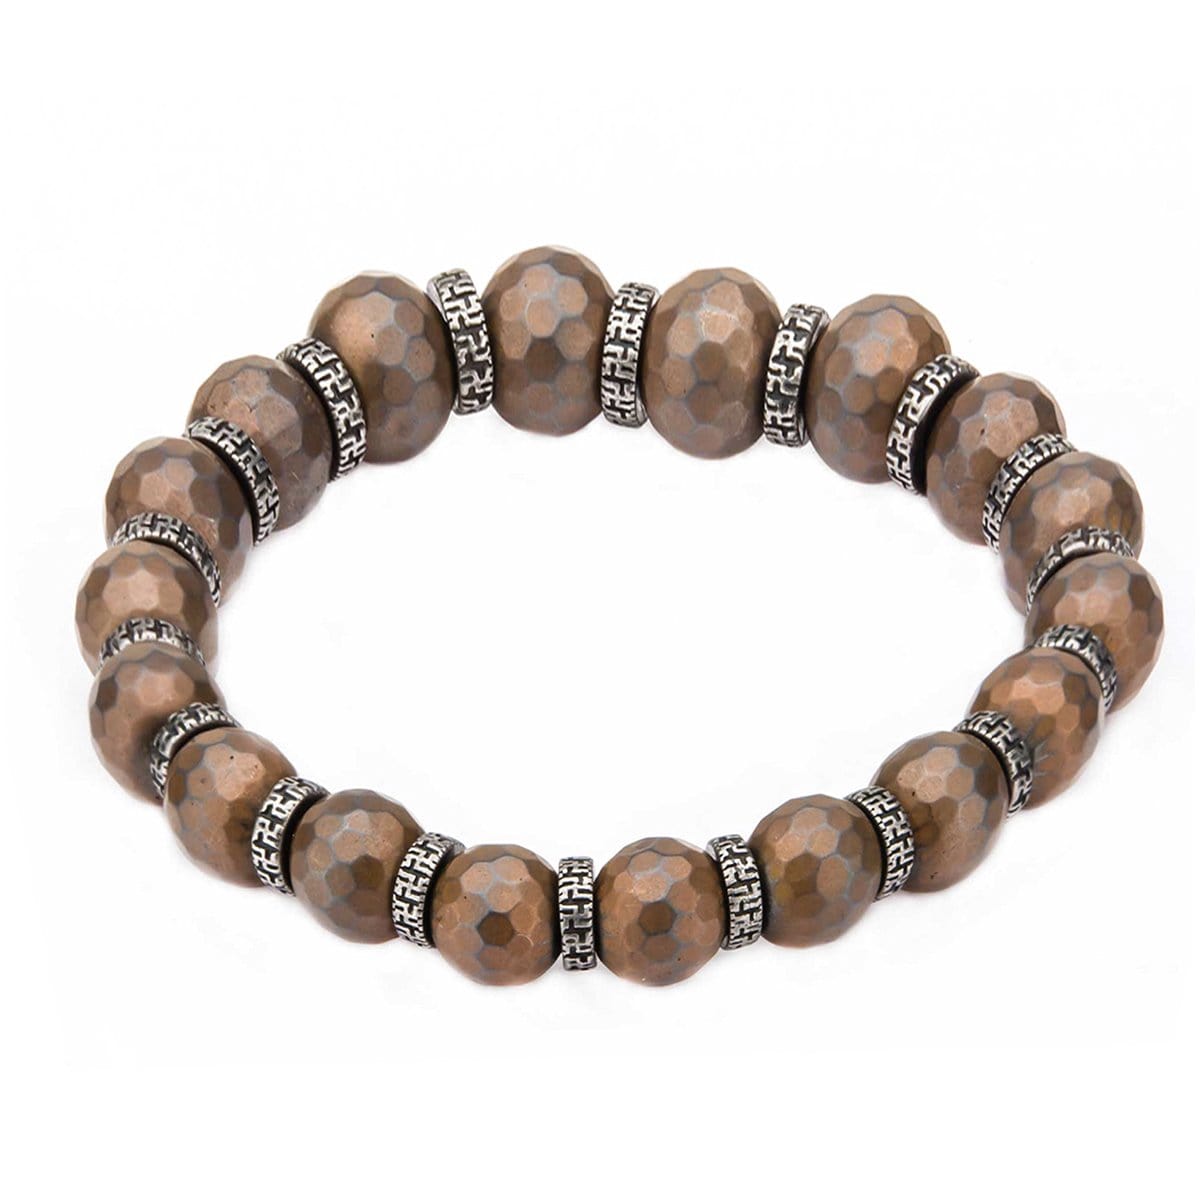 INOX JEWELRY Bracelets Antiqued Silver Tone Stainless Steel with Brown Hematite Bead and Antique Separator Stretch Bracelet BRRATE02